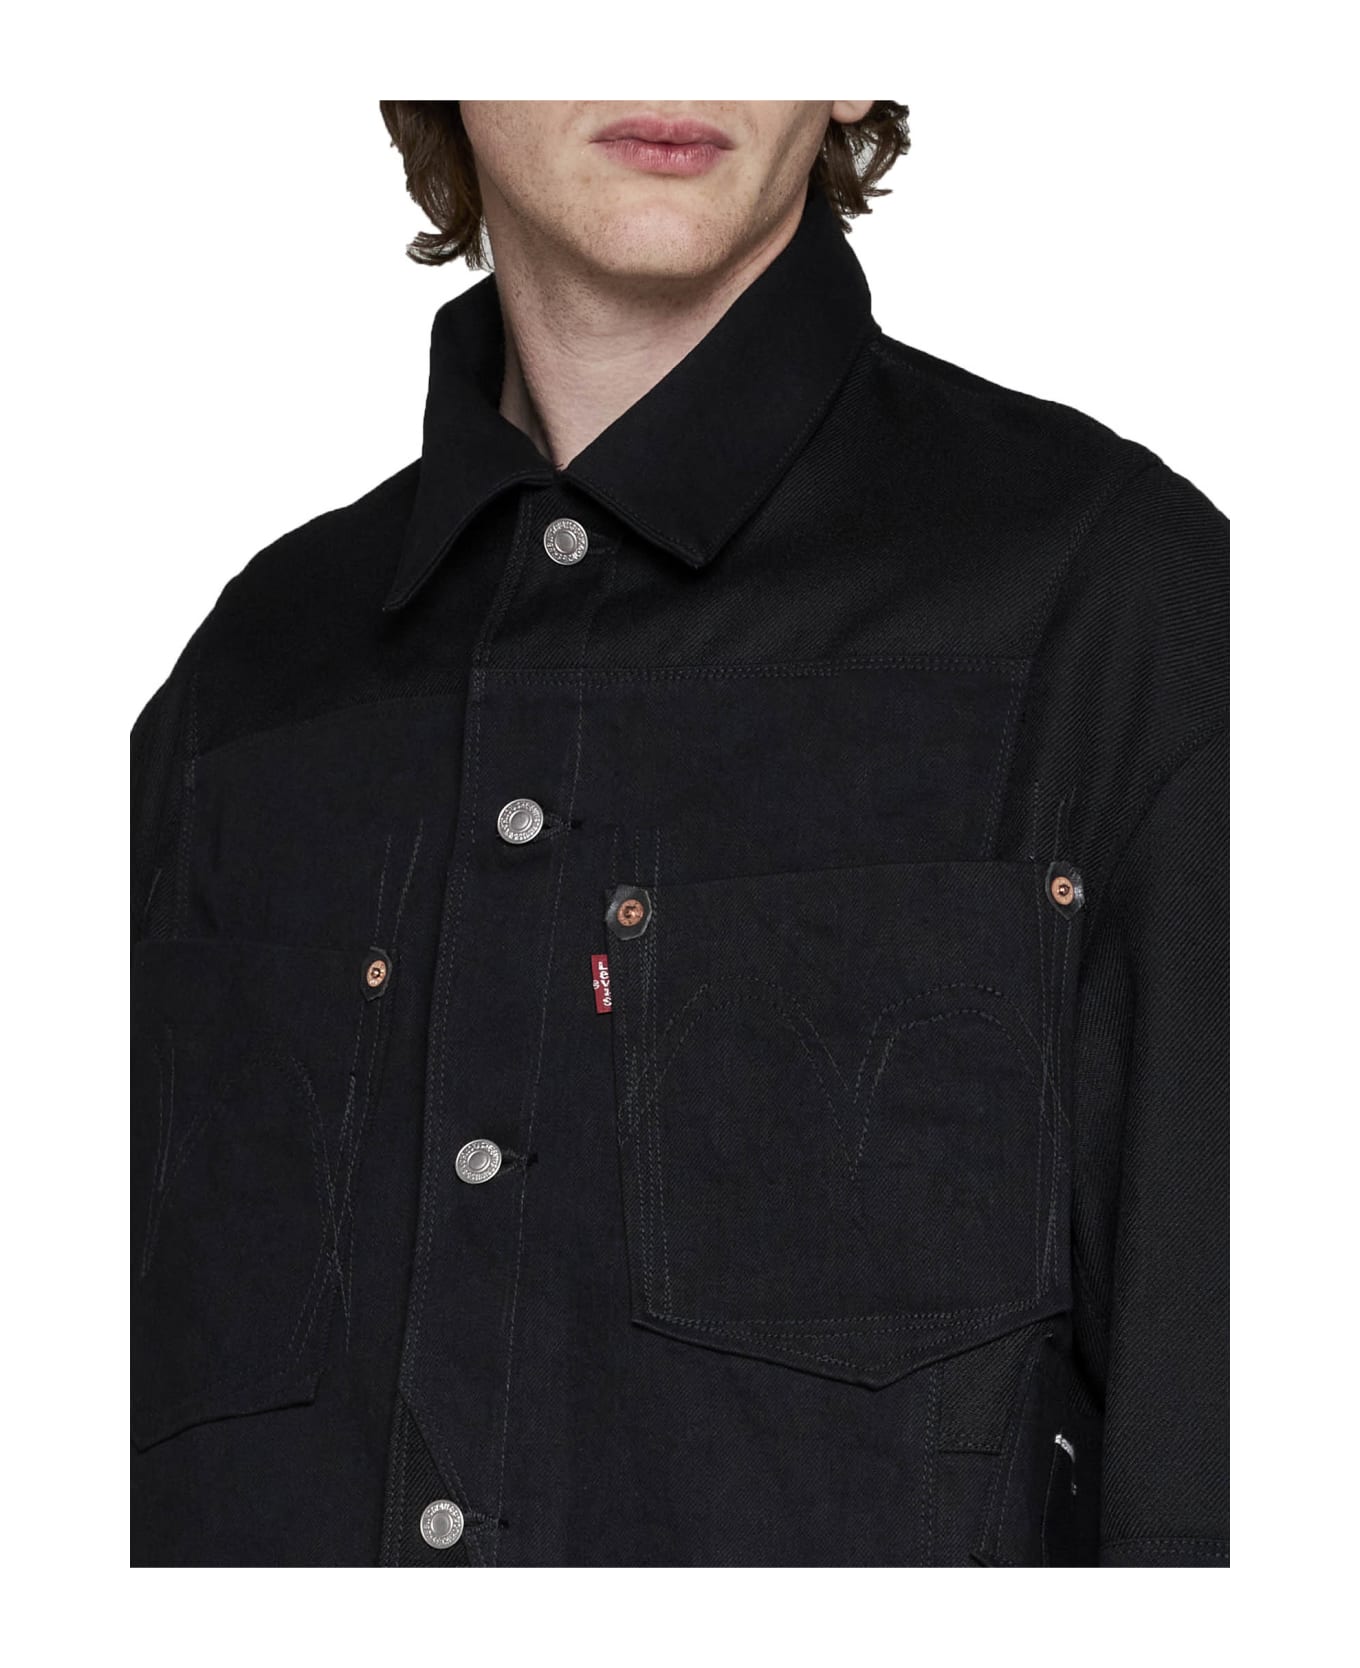 Junya Watanabe Comme Des Garçons Jacket - Would recommend this jacket